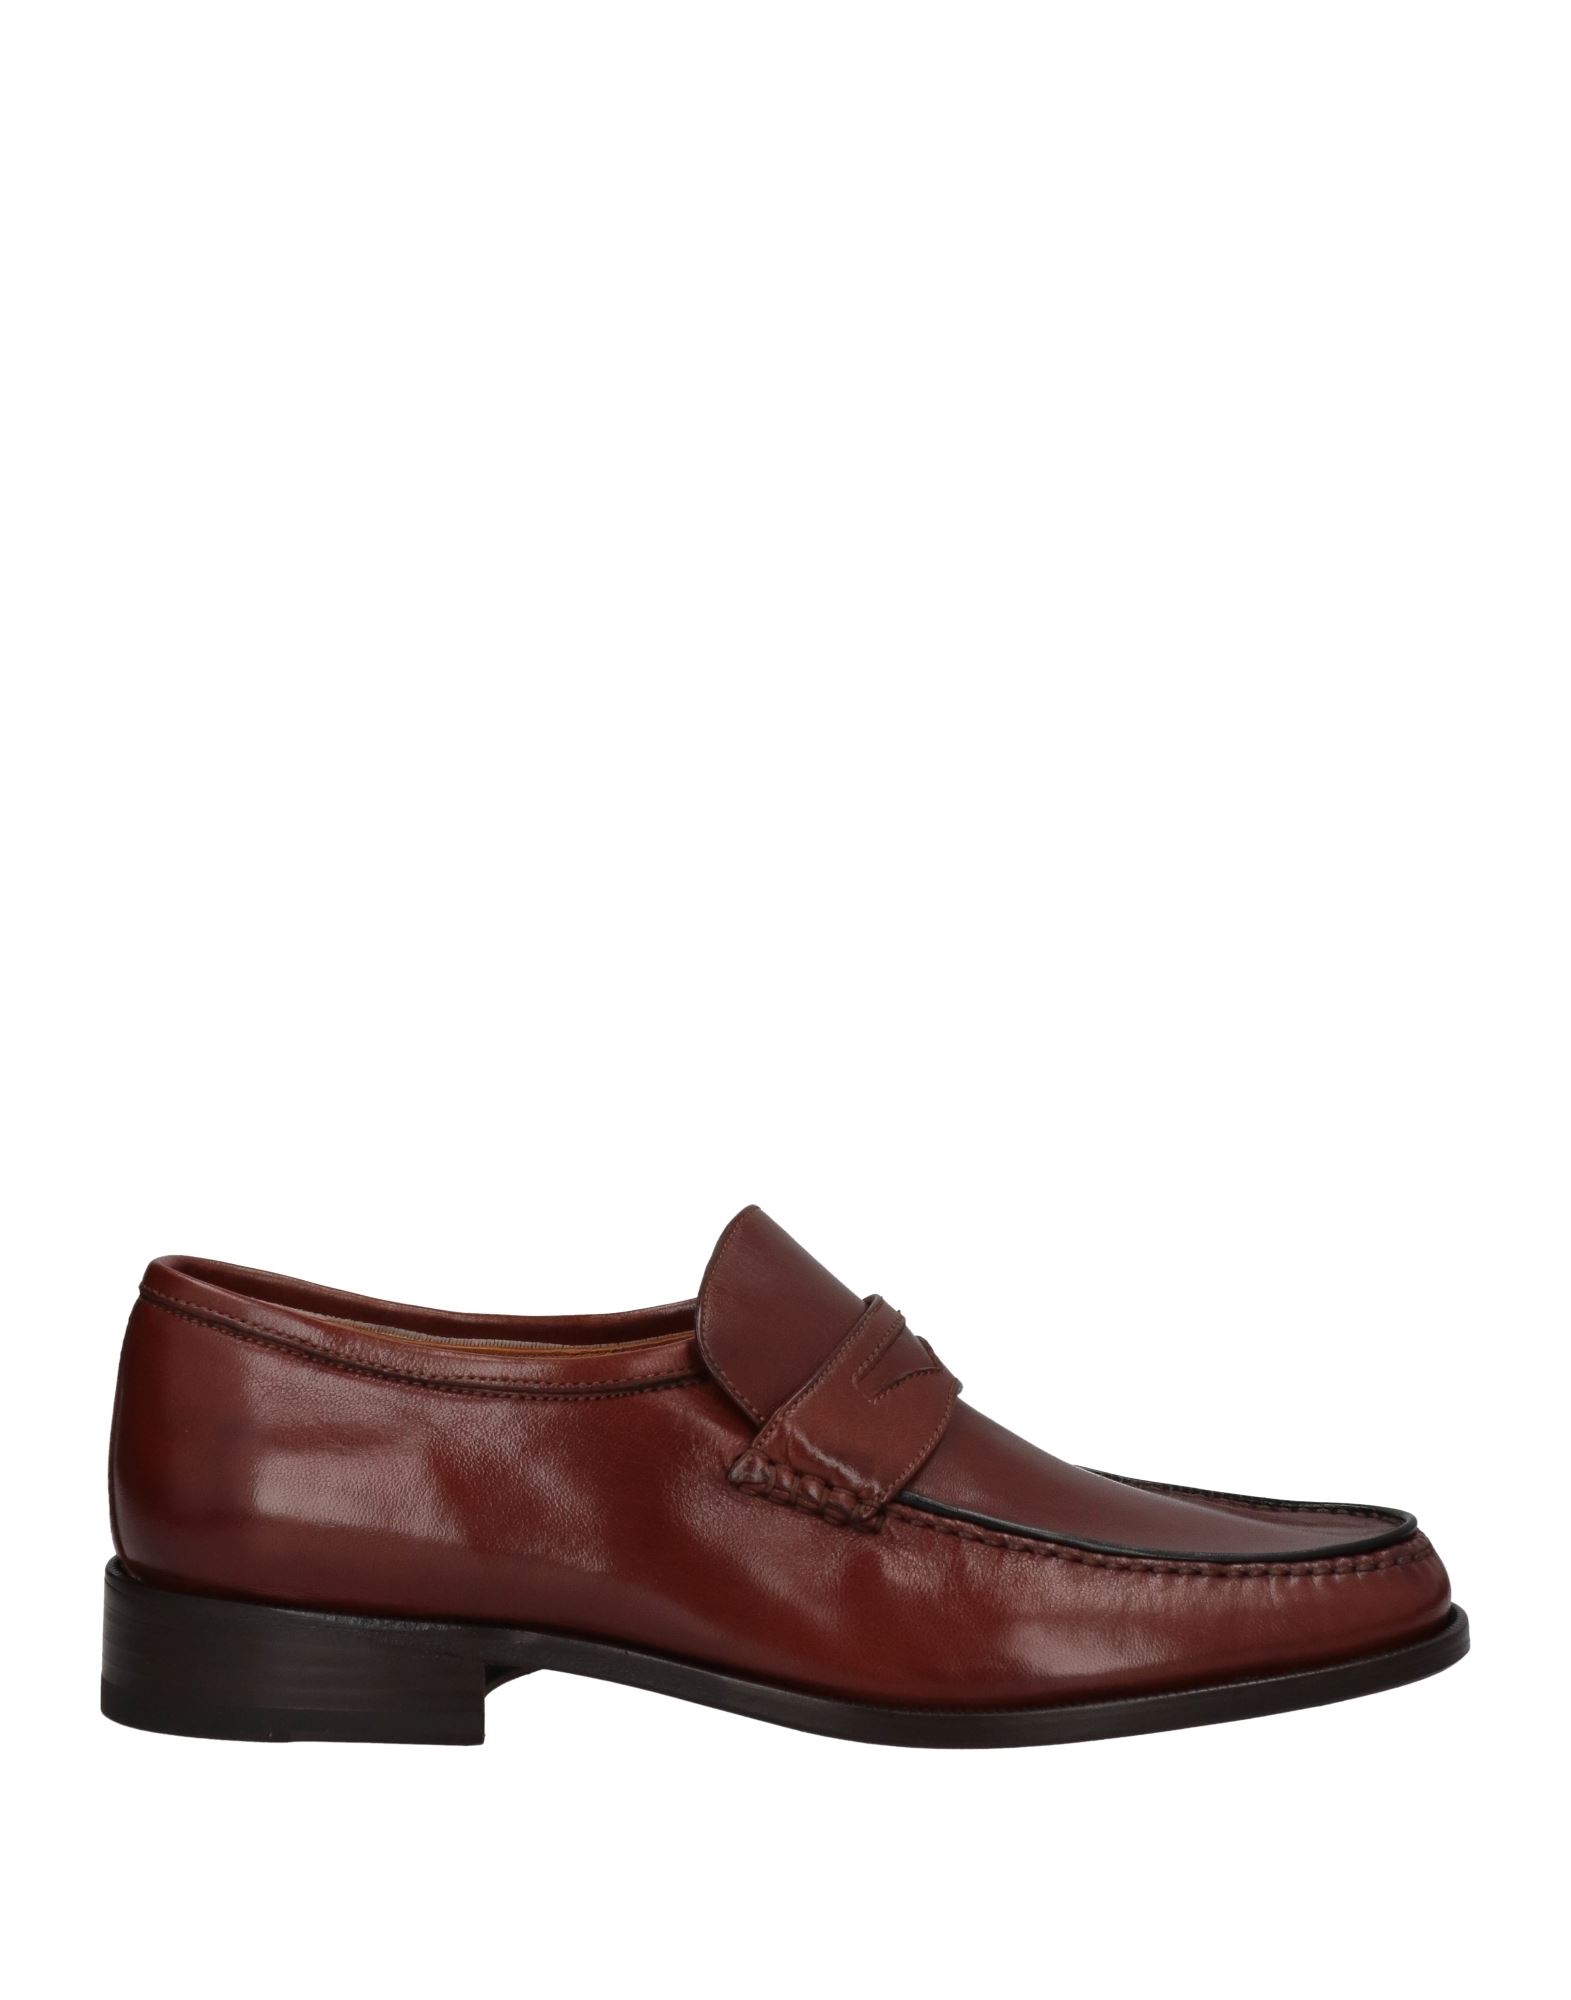 Calpierre Loafers In Burgundy